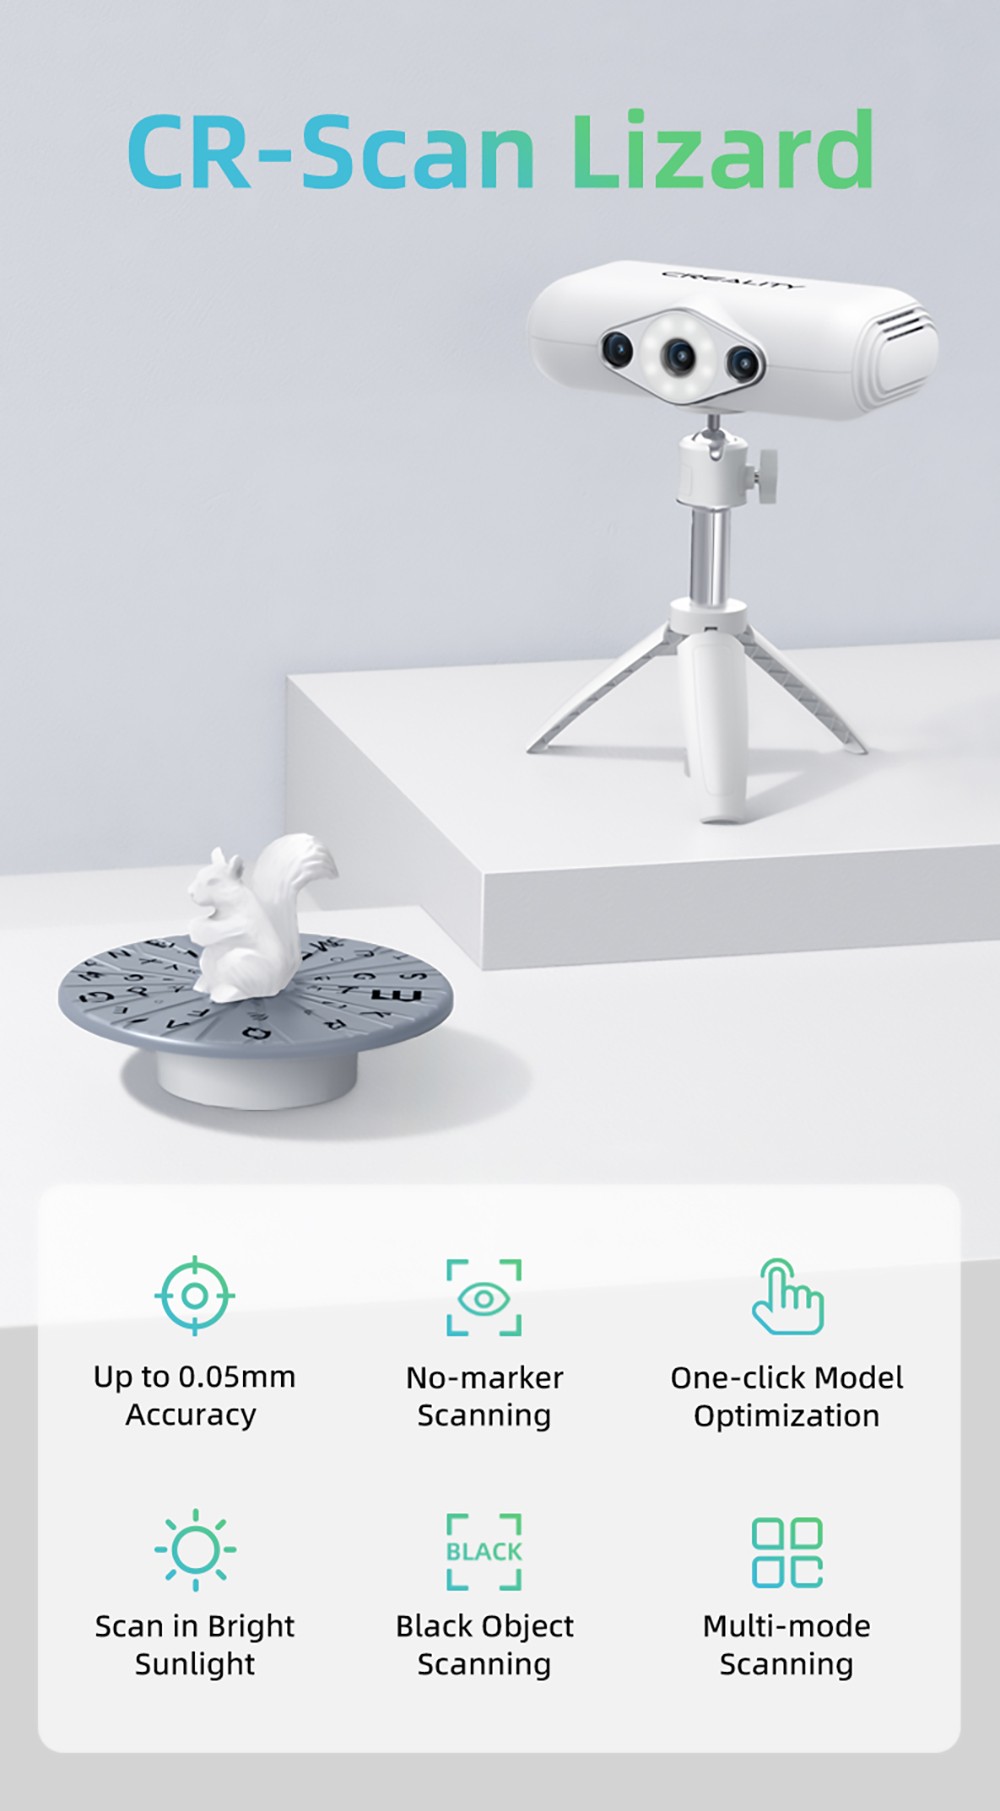 520€ with Coupon for Creality CR-Scan Lizard 3D Scanner 0.05mm Ultra-High Accuracy No-marker - GEEKBUYING